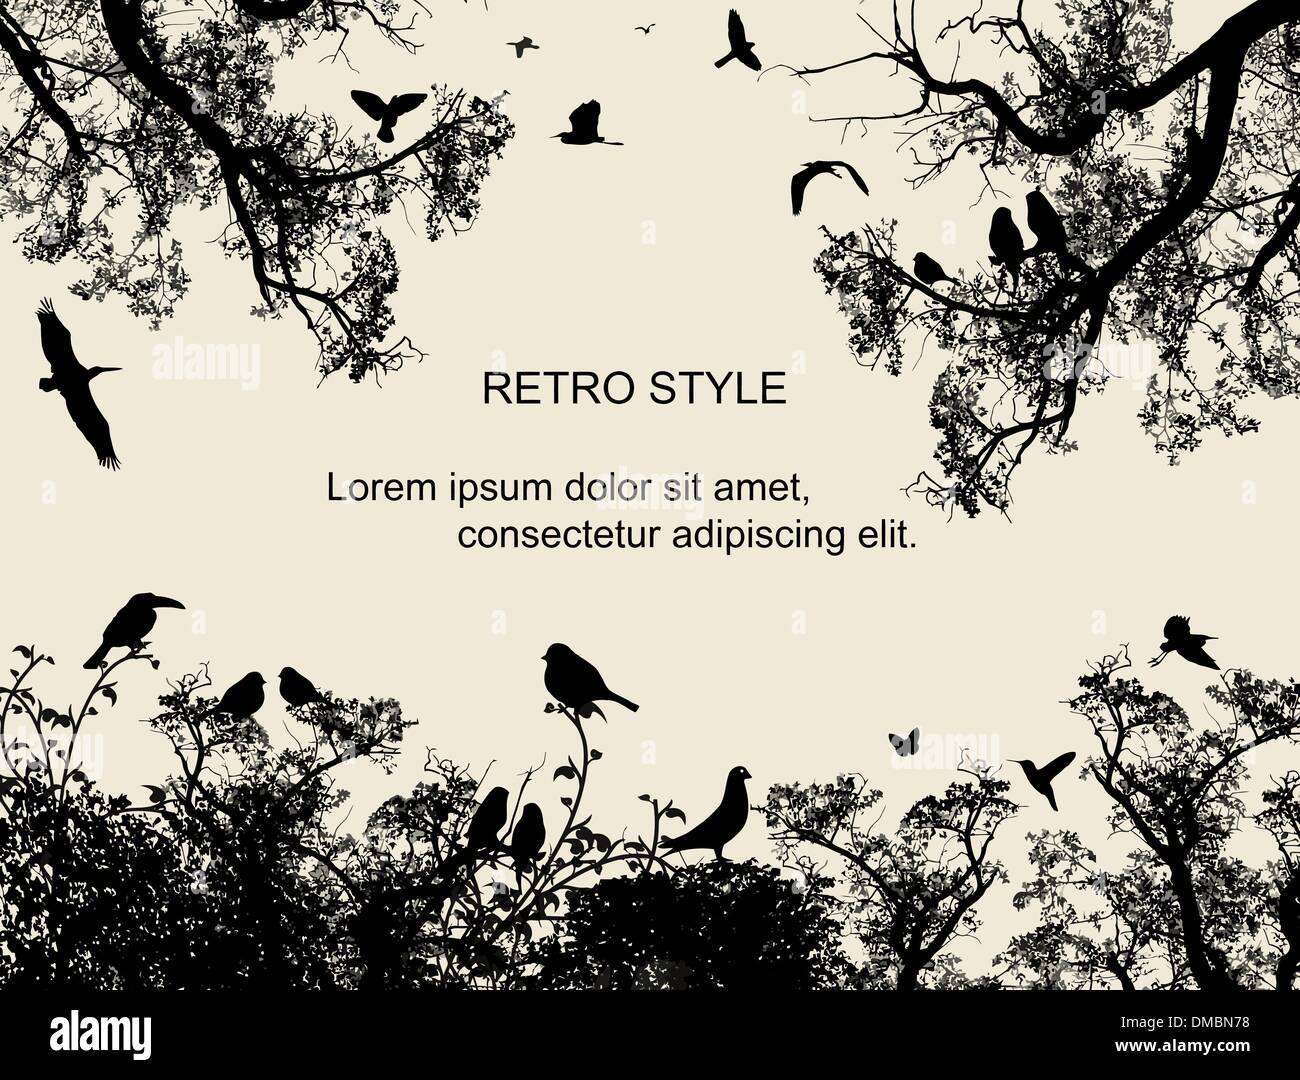 Birds and trees on retro style background Stock Vector